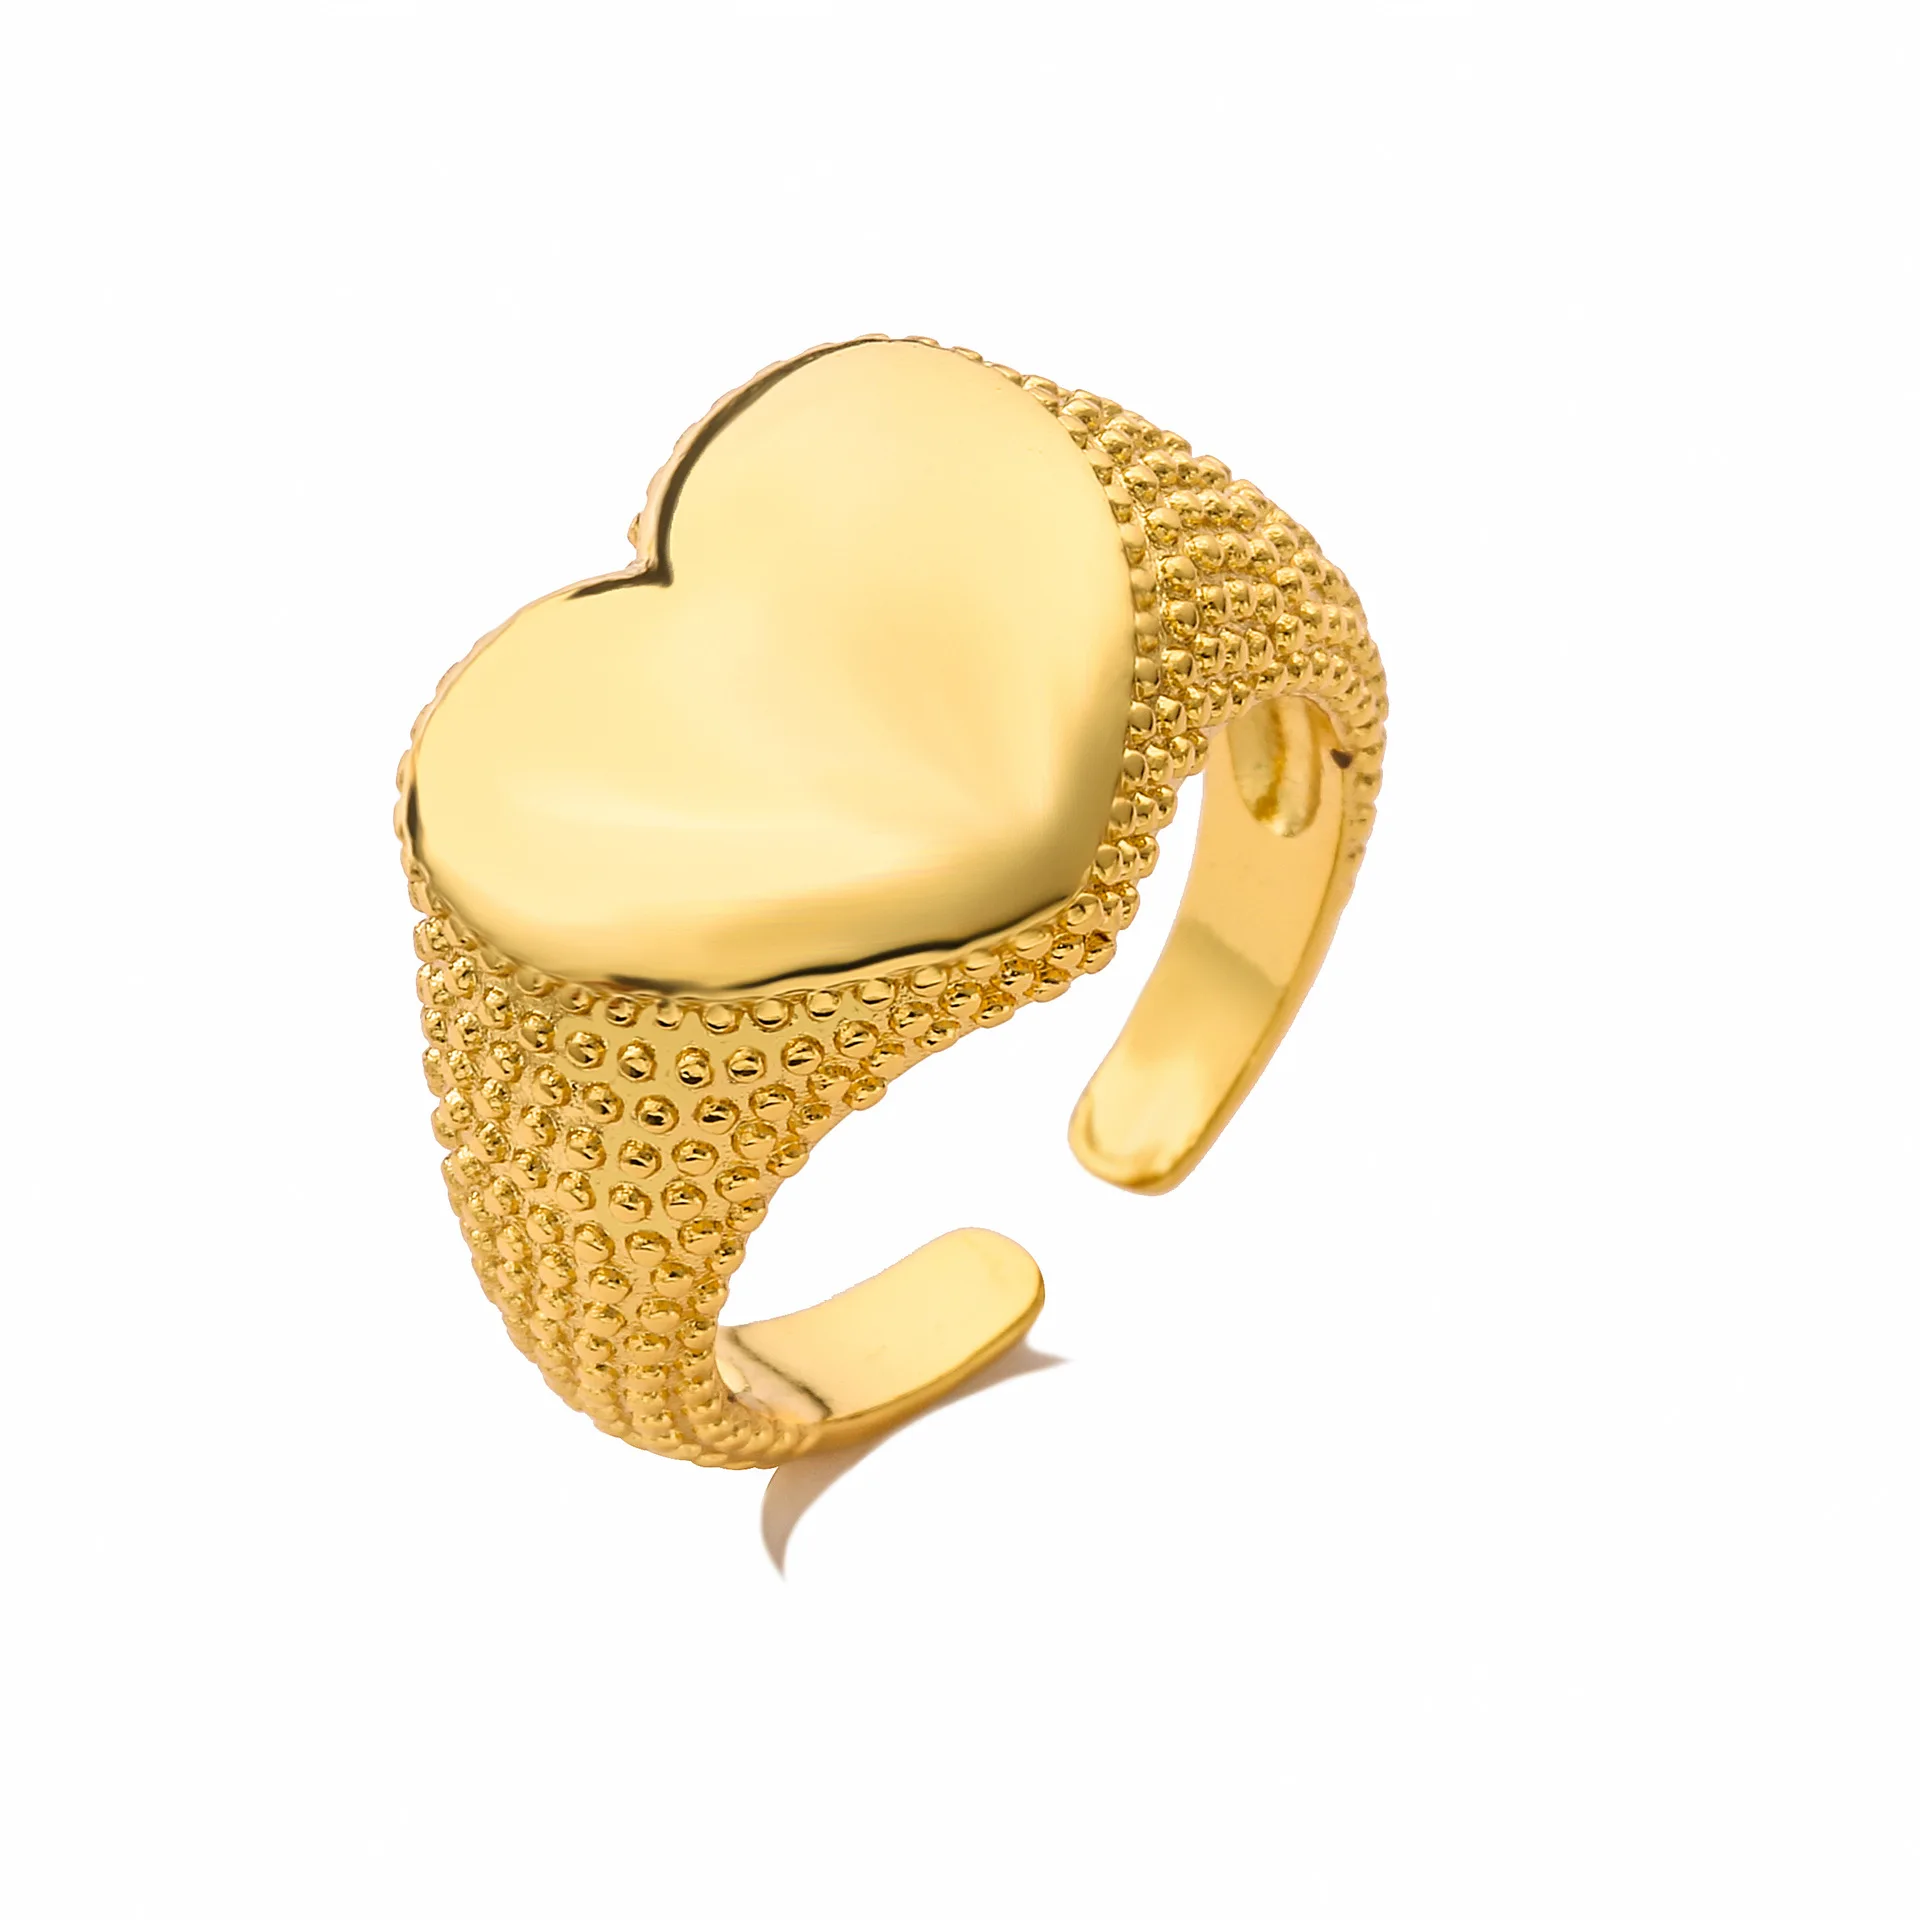 

New Ring Women's 18k Gold Plated Heart shaped Cupid Arrow Adjustable Sweet Romantic Fashion Jewelry Lover Gift